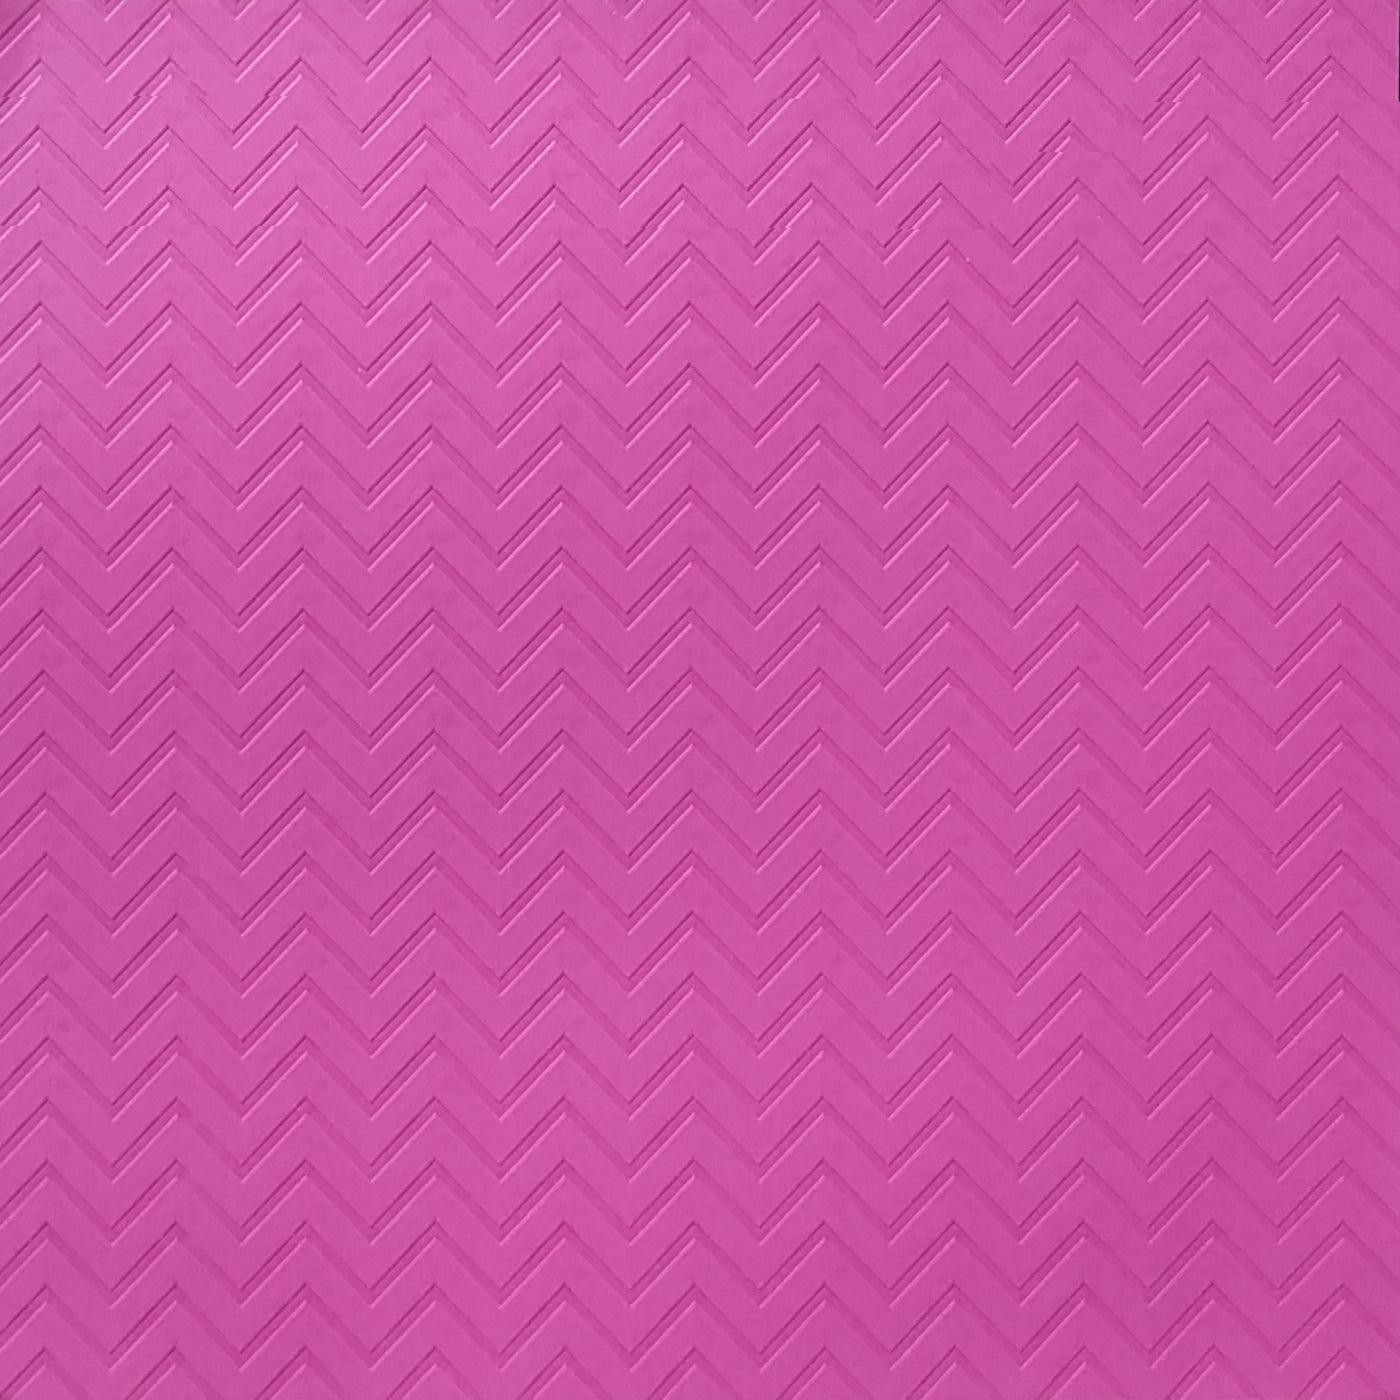 Hot Pink 12x12 cardstock with color-on-color embossed dots - Recollections Signature